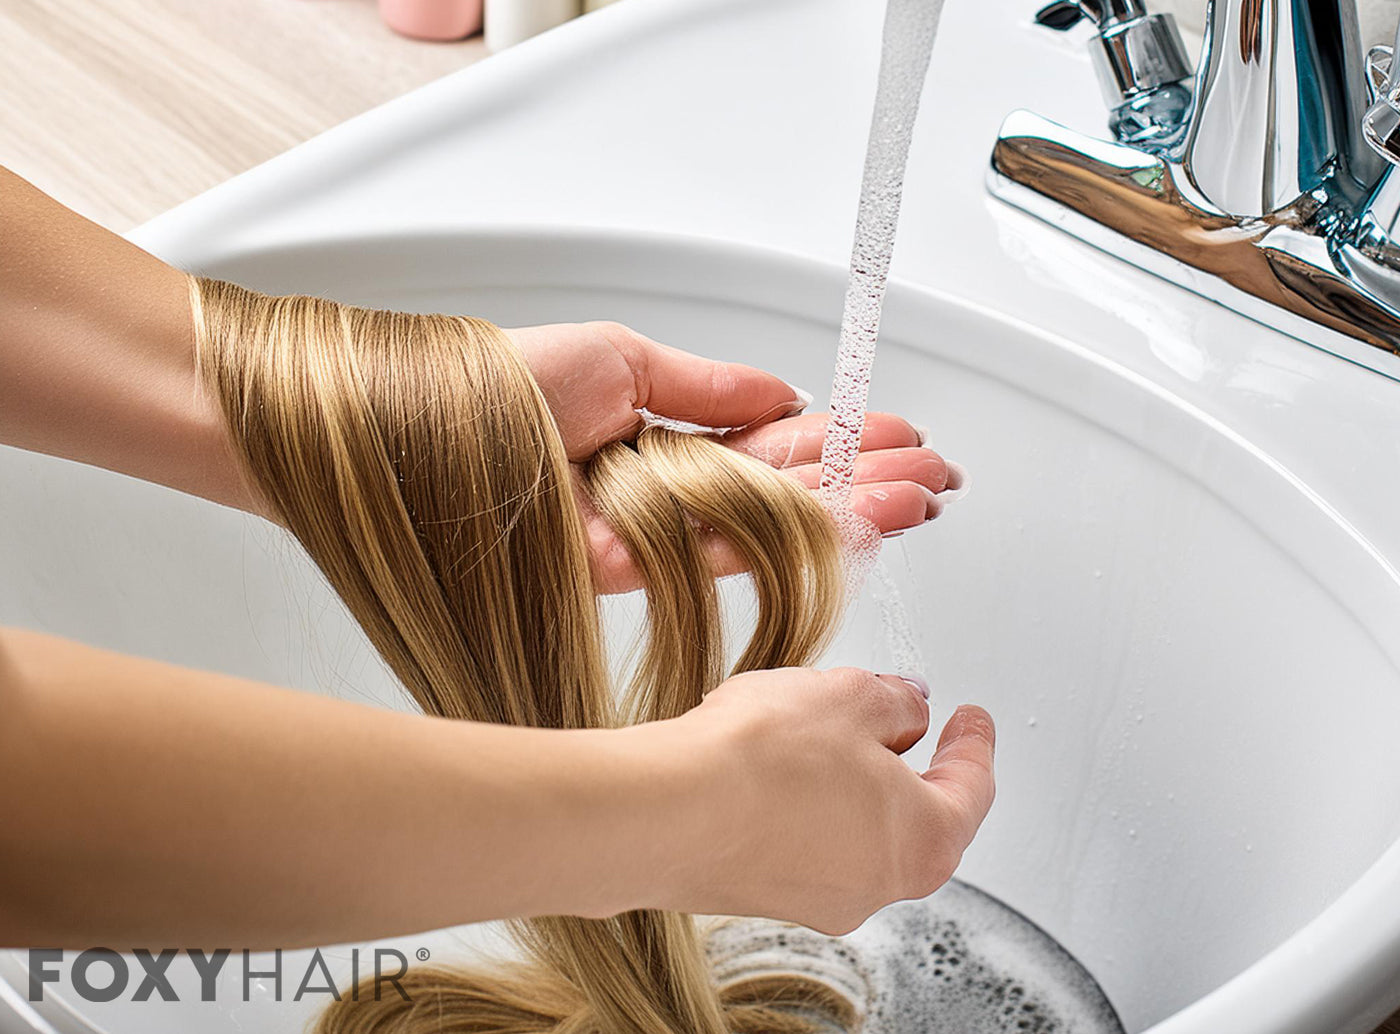 washing clip in hair extensions in sink